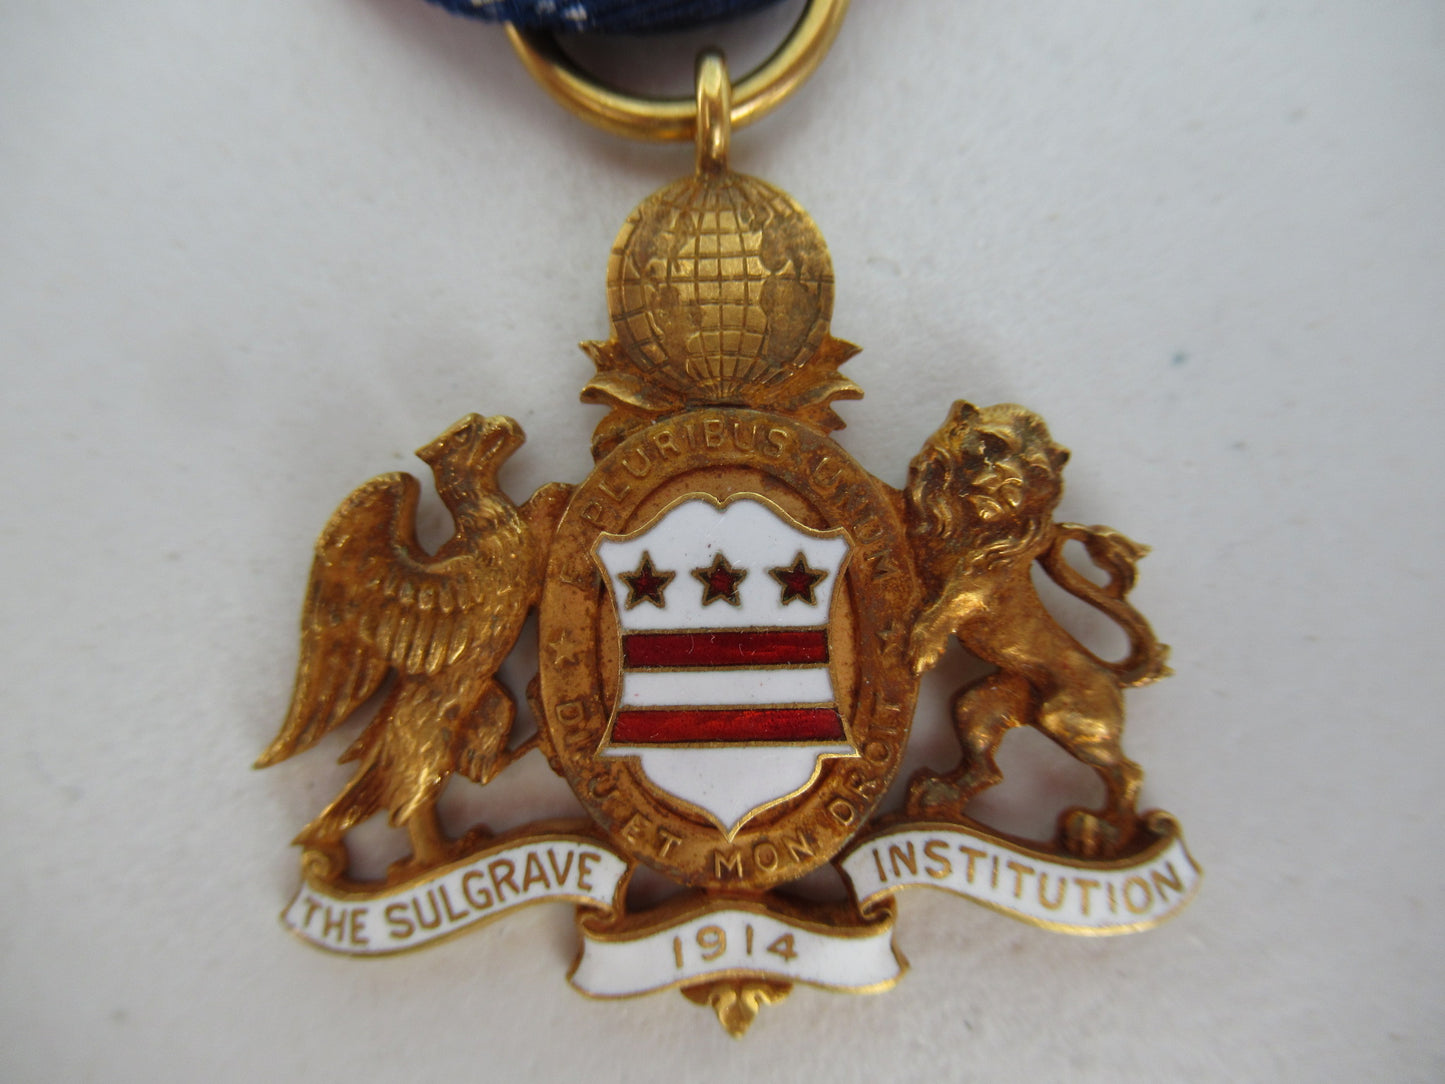 USA SOCIETY BADGE MEDAL. MADE IN GOLD (17.25GRAMS). NAMED. NUMBERED 401. MARKED "TIFFANY & CO. 14K". VERY RARE!